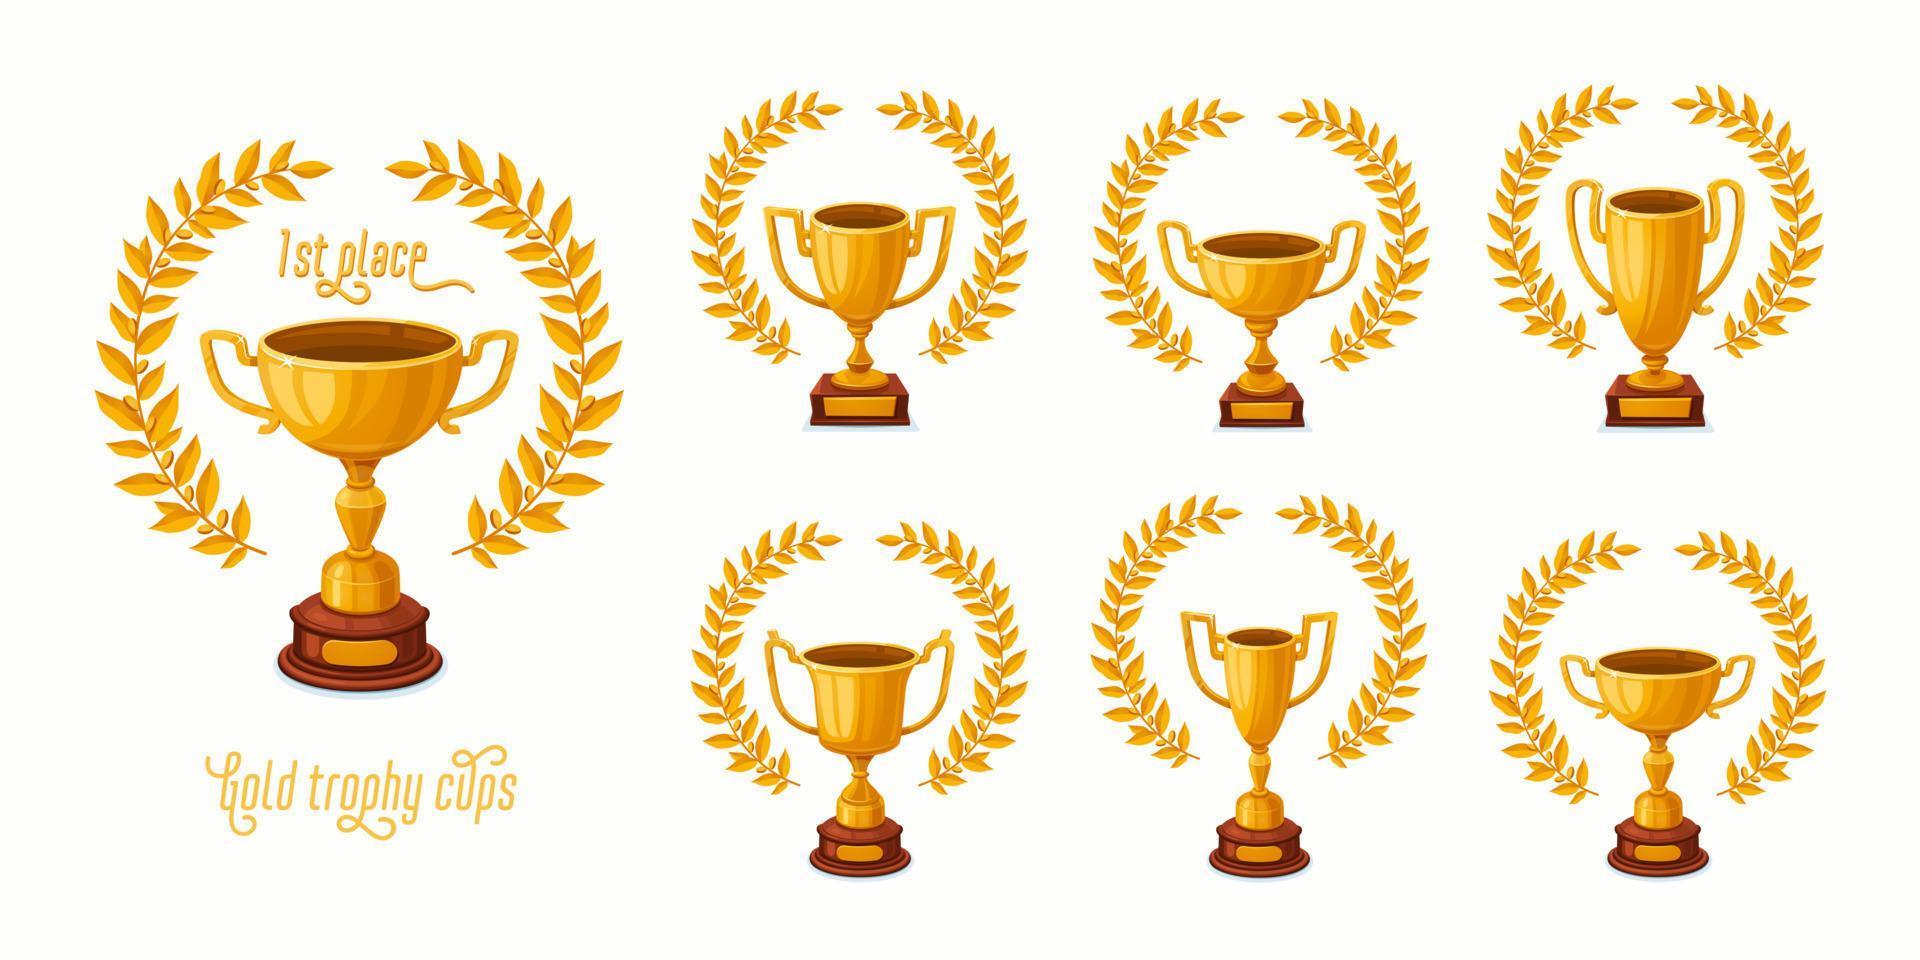 Gold trophy cups with laurel wreaths. Trophy award cups set with different shapes - 1st place winner trophies. Cartoon style vector illustration.